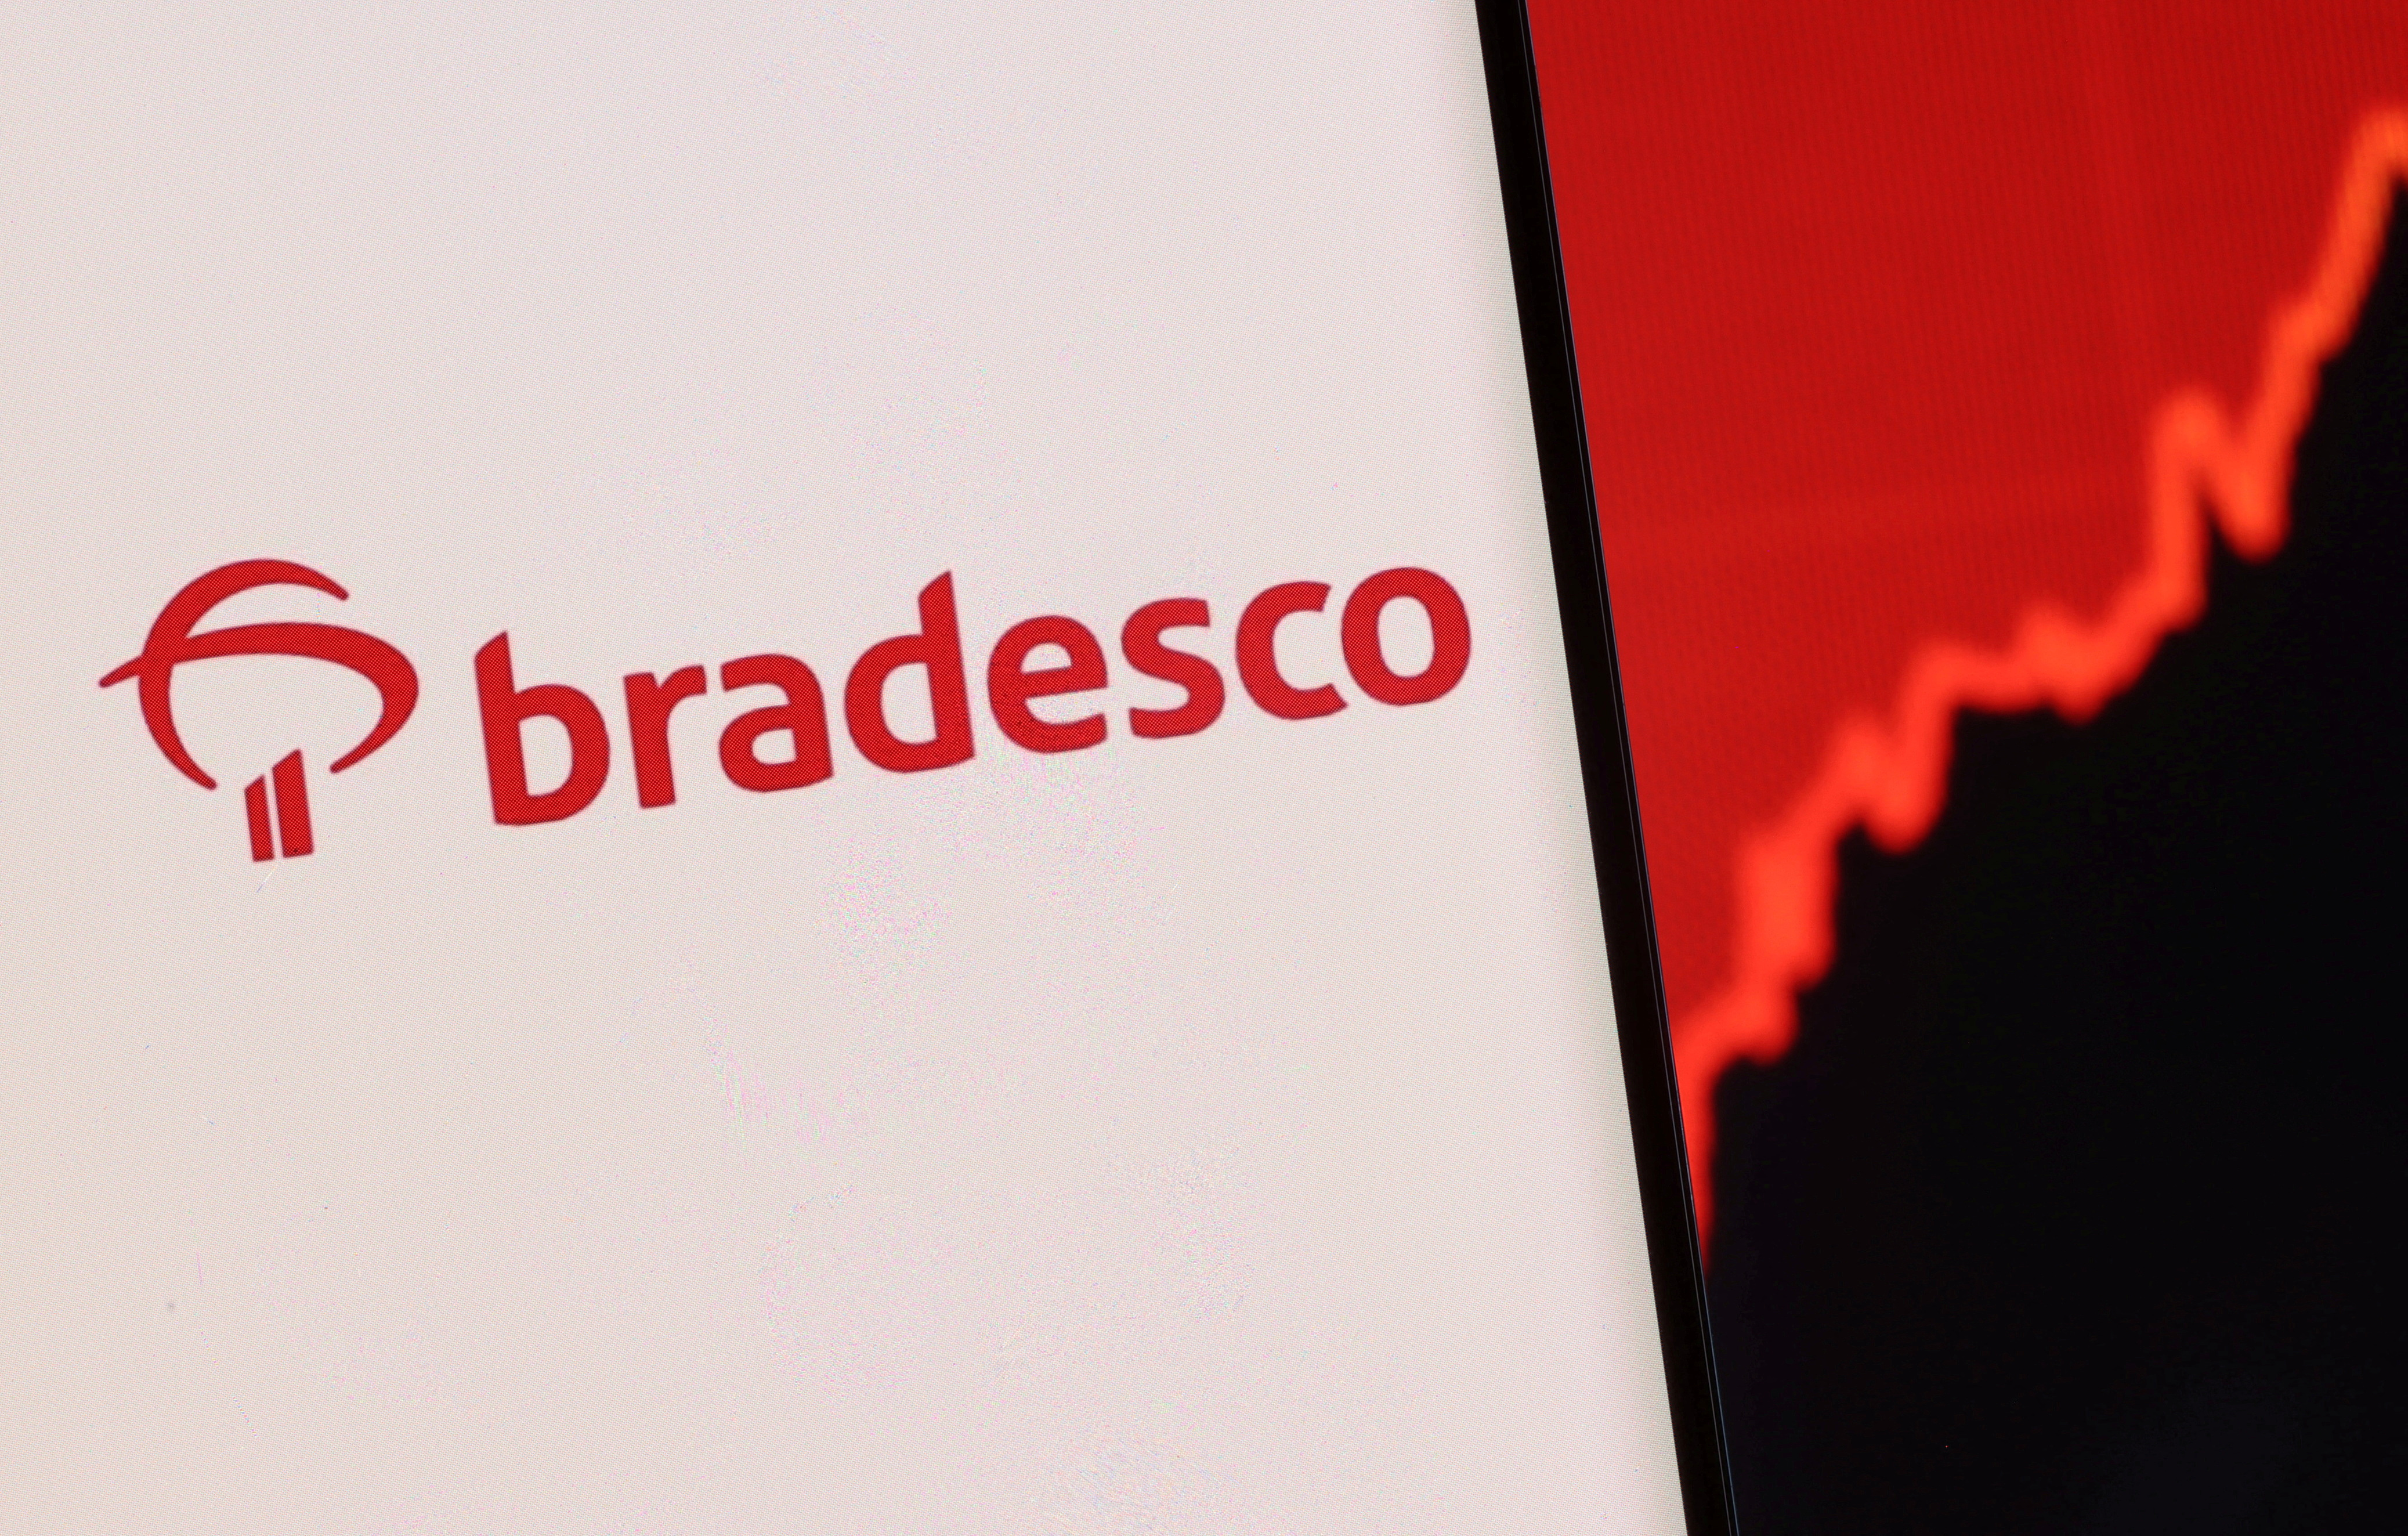 Illustration shows a smartphone with displayed Bradesco logo and stock graph